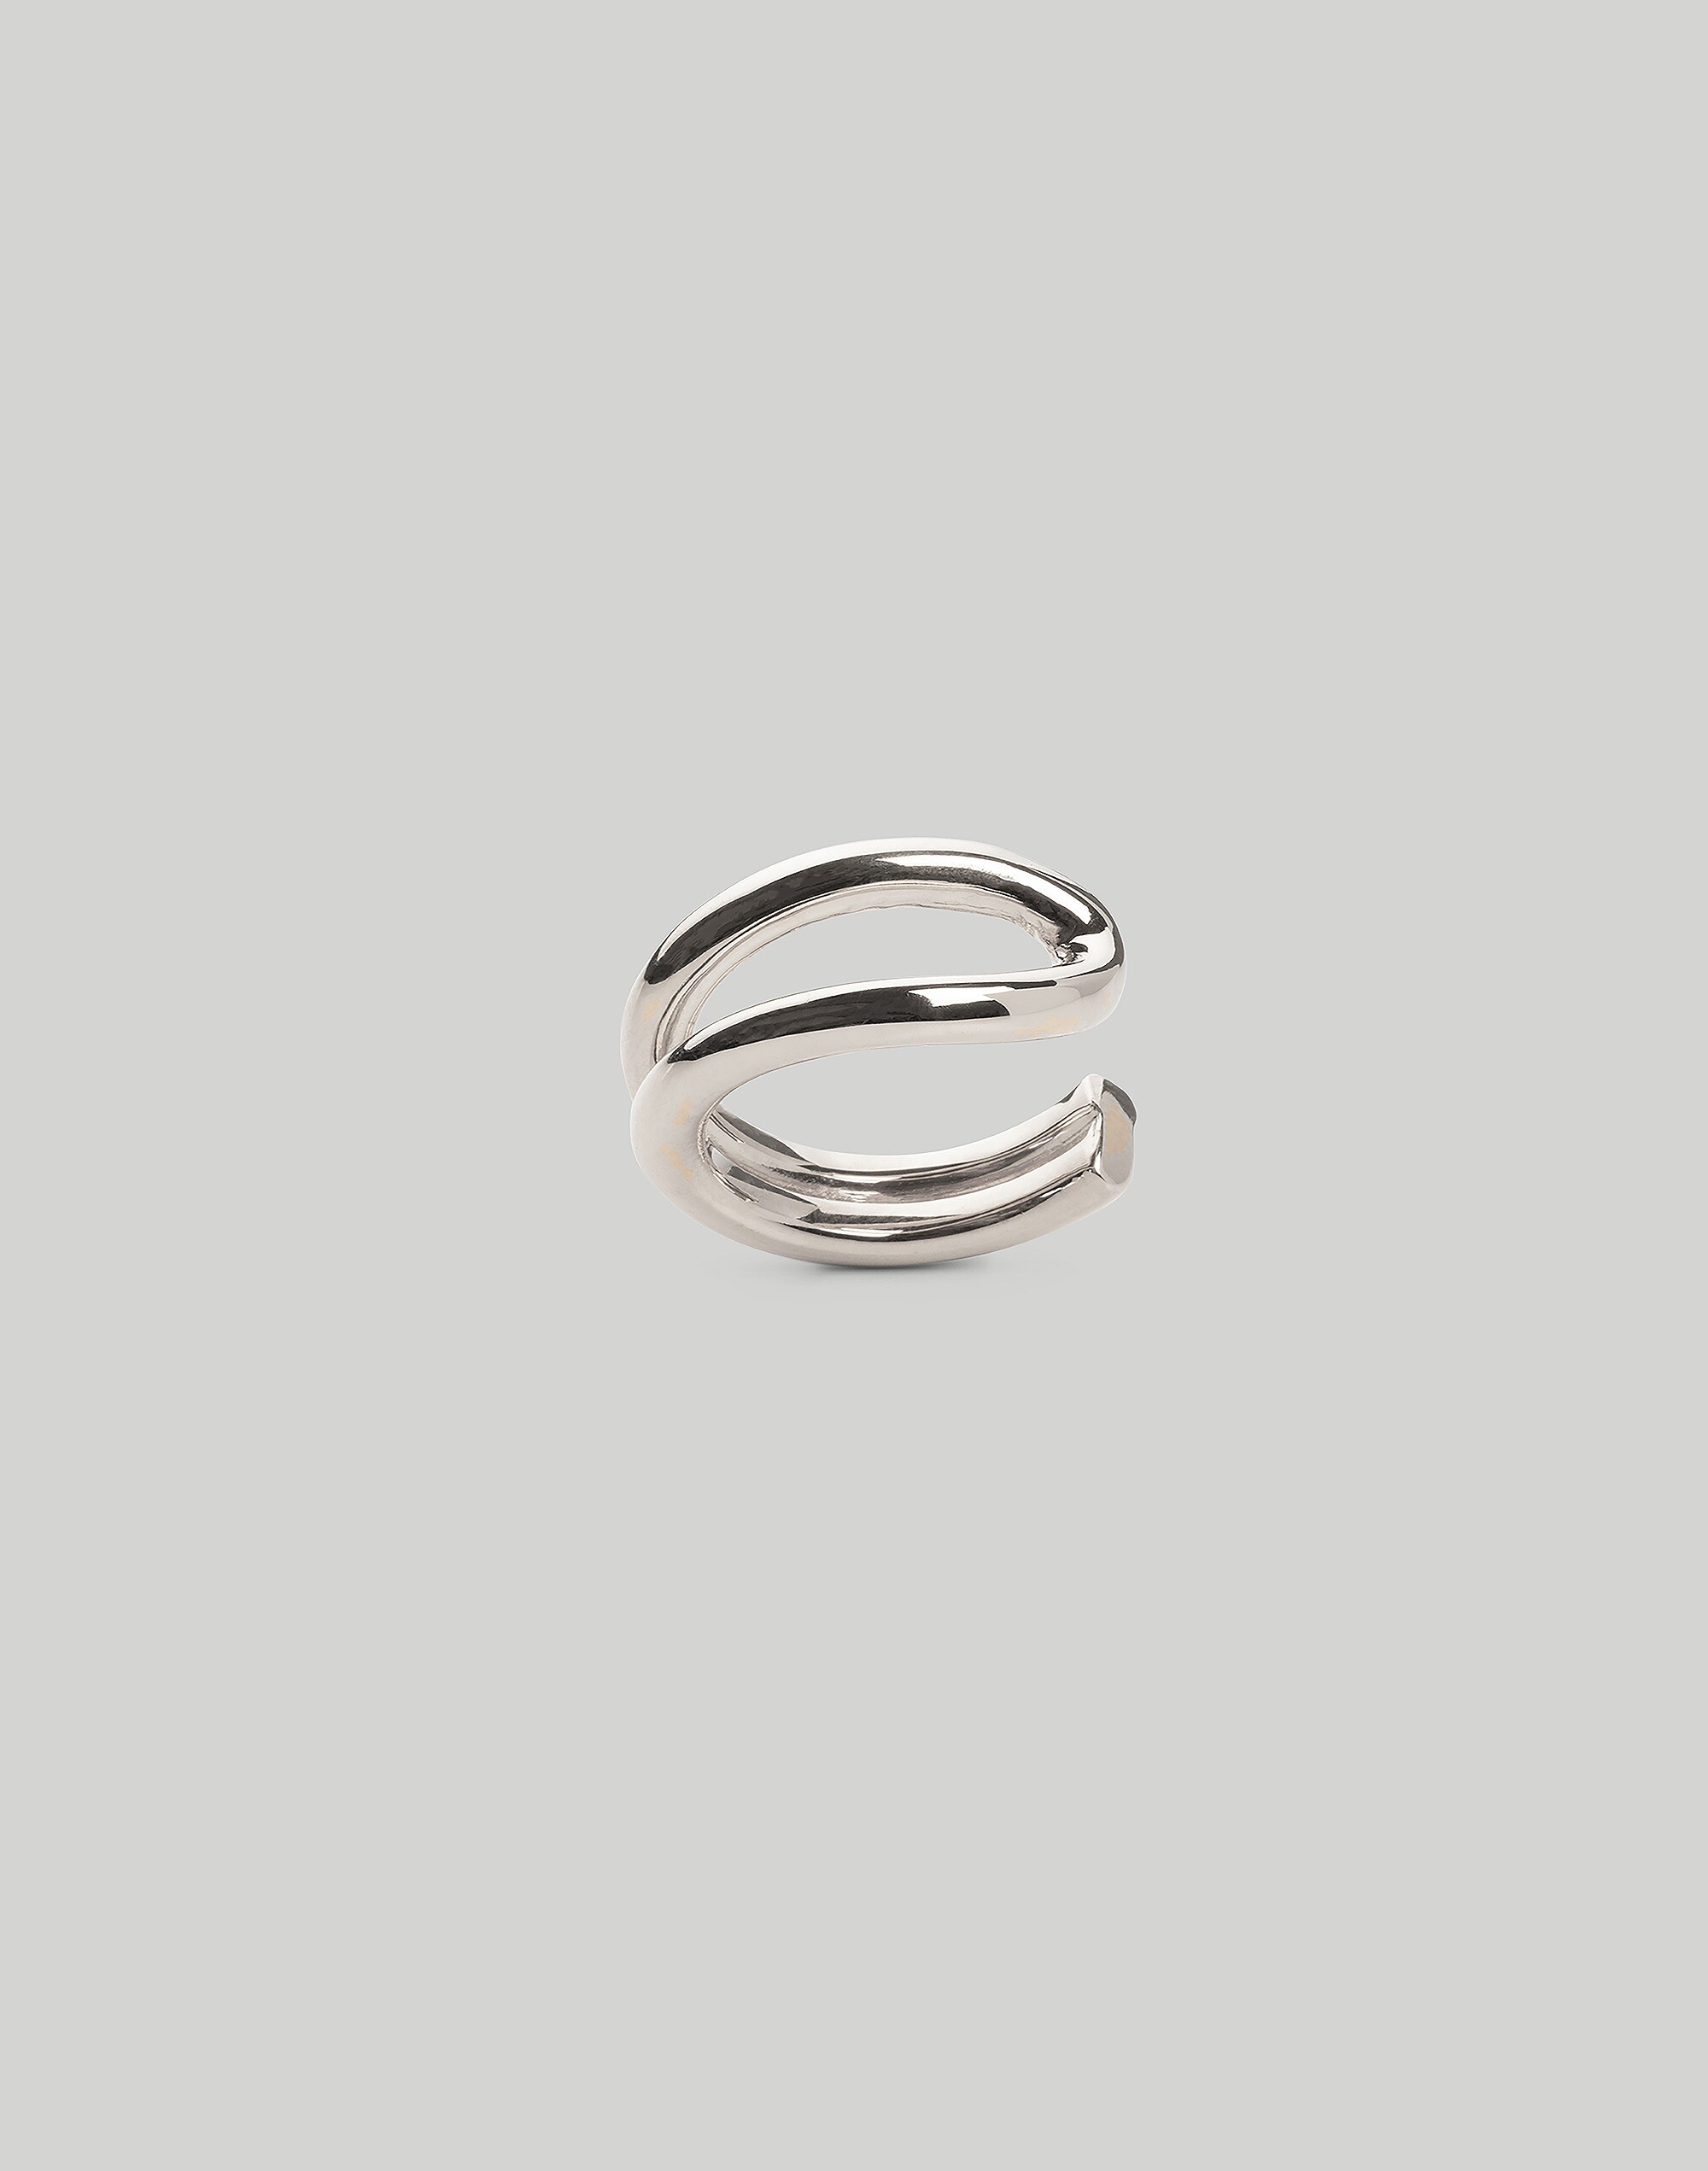 CHARLOTTE CAUWE STUDIO MAGRITTE RING IN STERLING SILVER